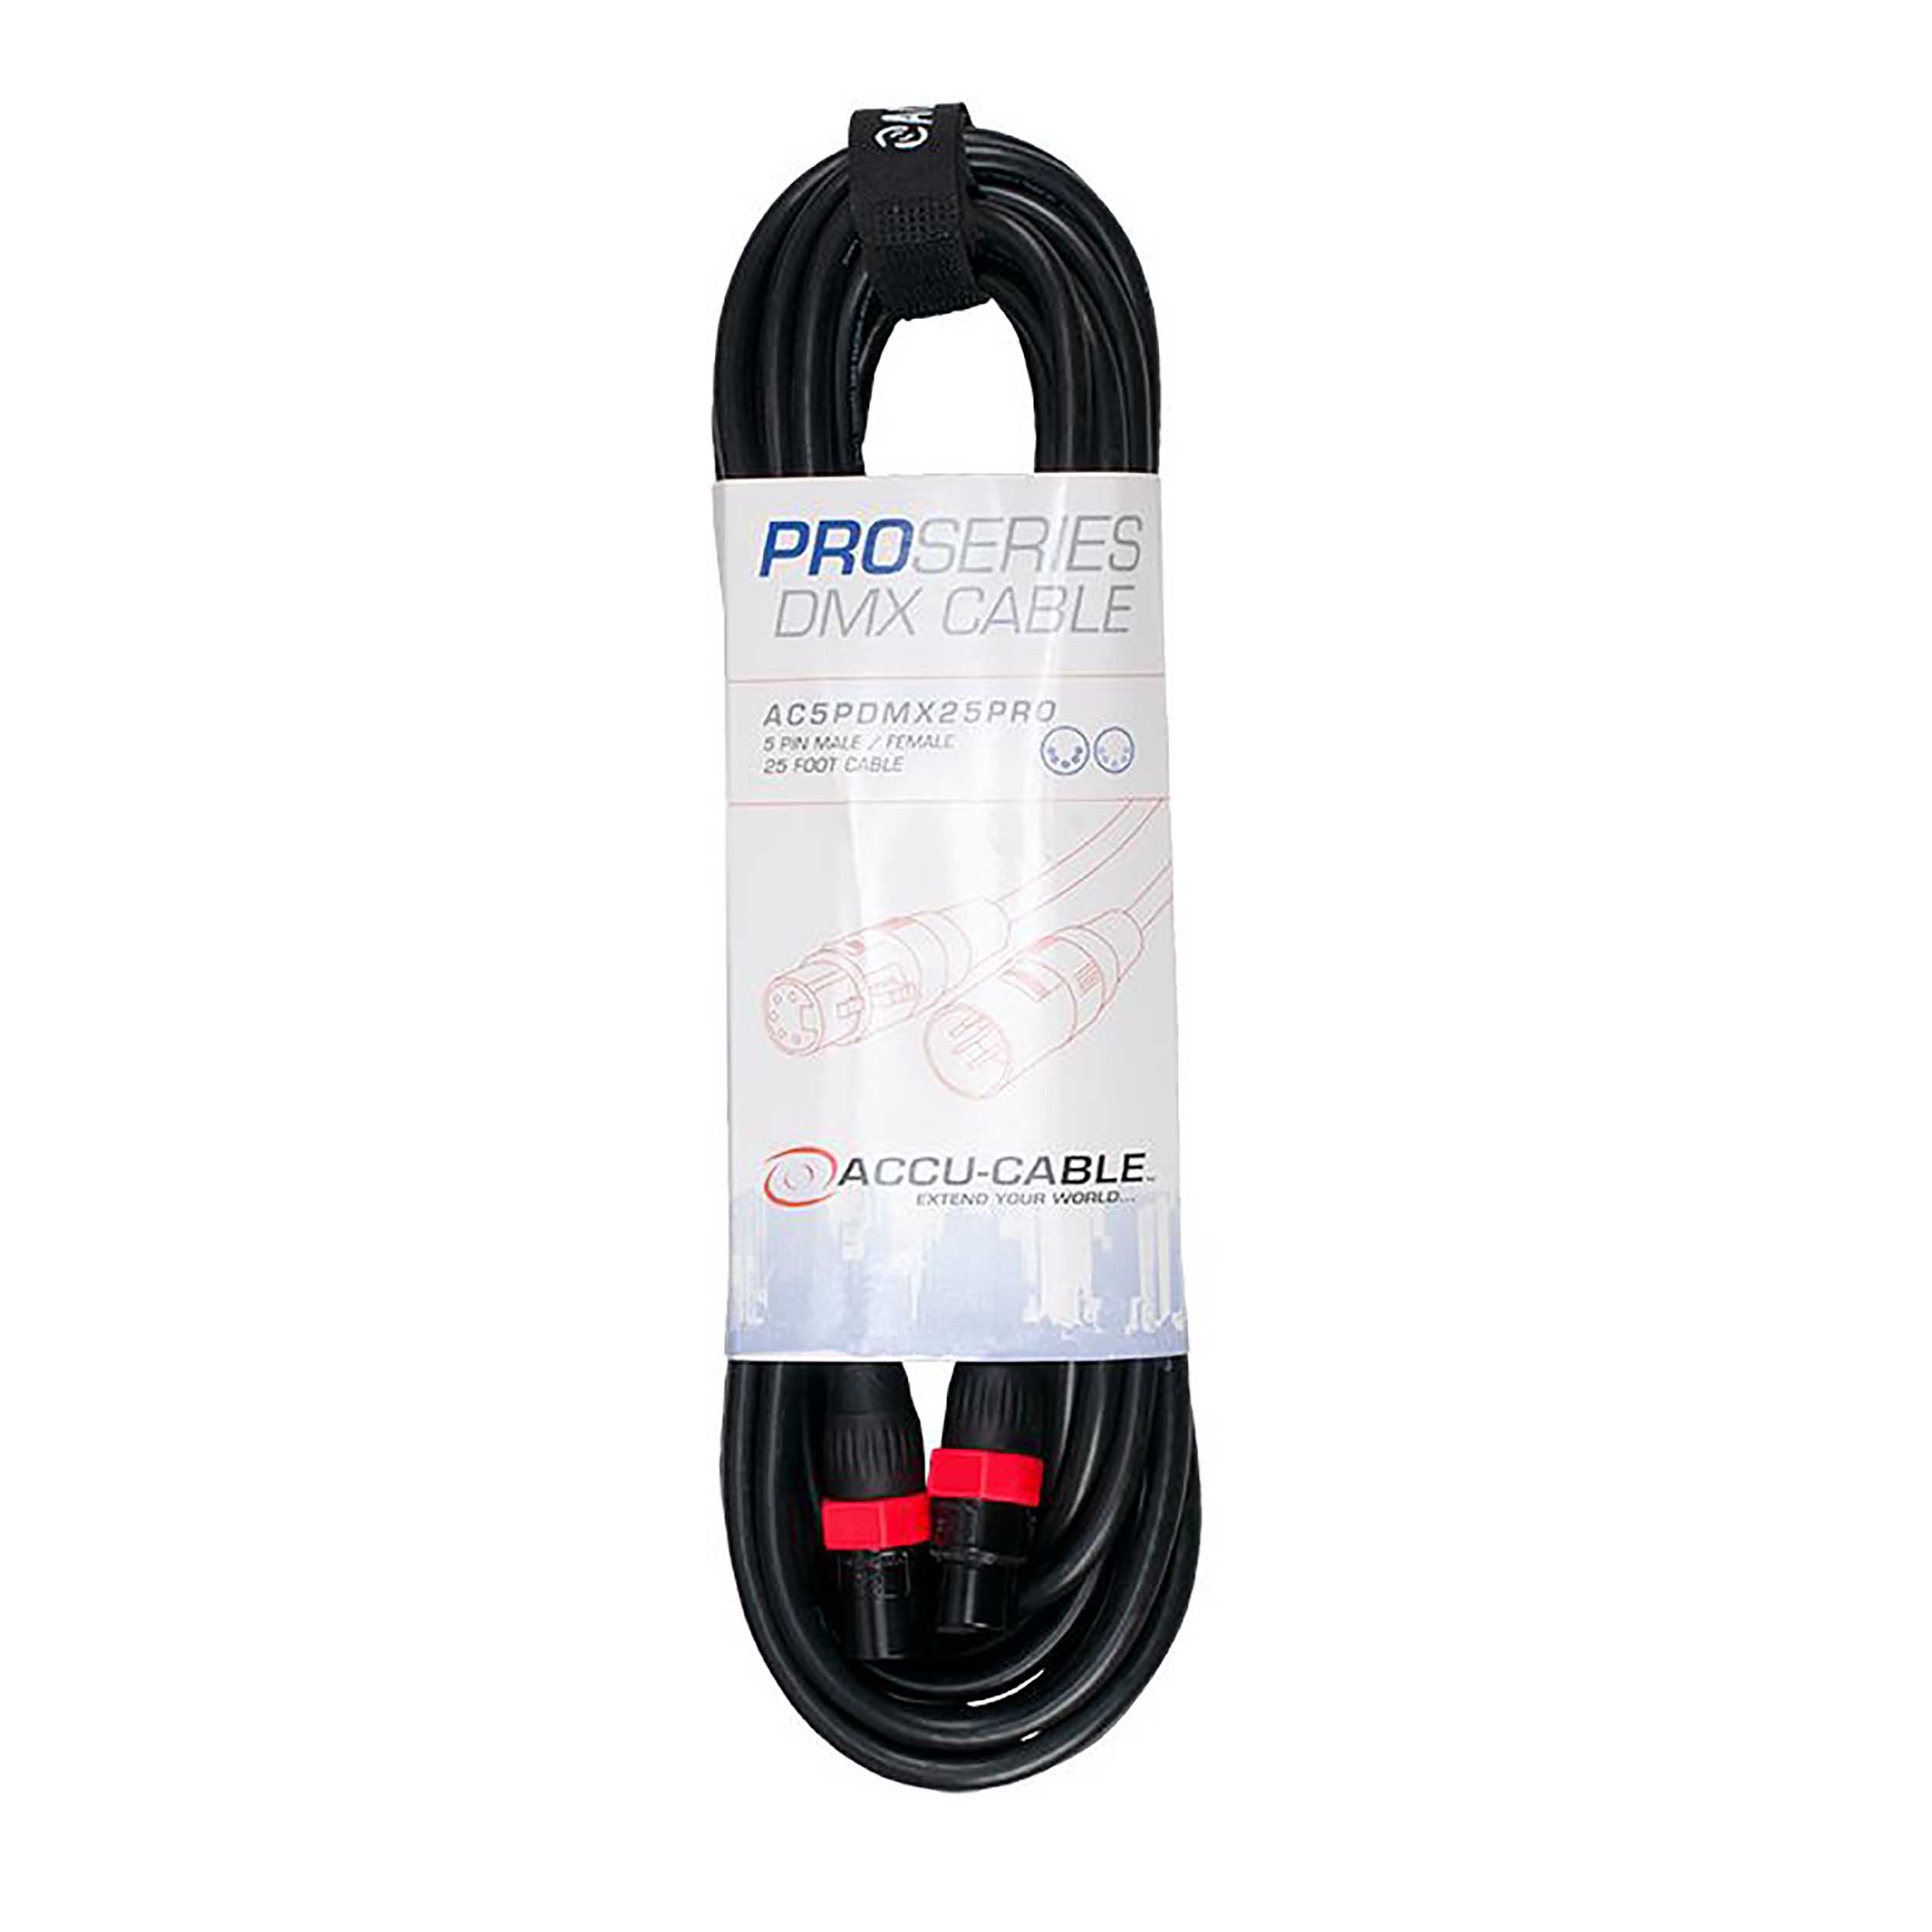 Accu-Cable AC5PDMX25PRO, Pro Series 5-Pin Male to 5-Pin Female Connection DMX Cable - 25 Ft by Accu Cable